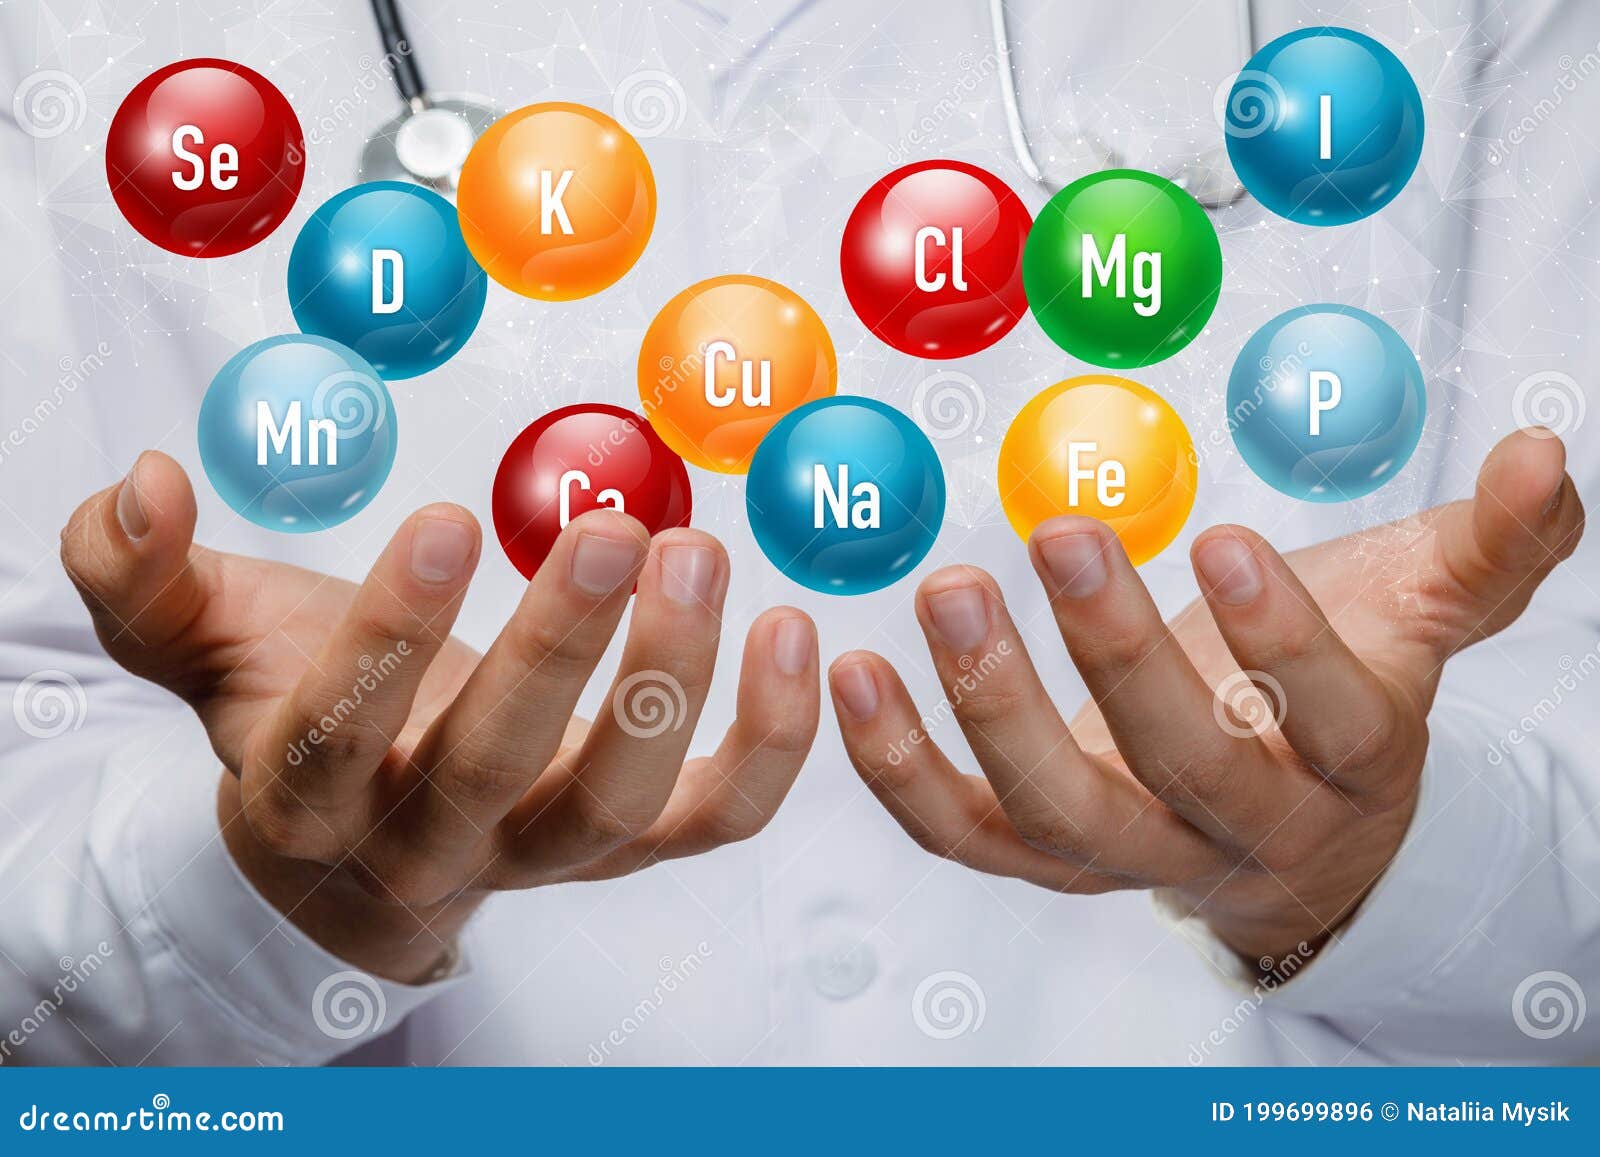 doctor shows vitamins in hands